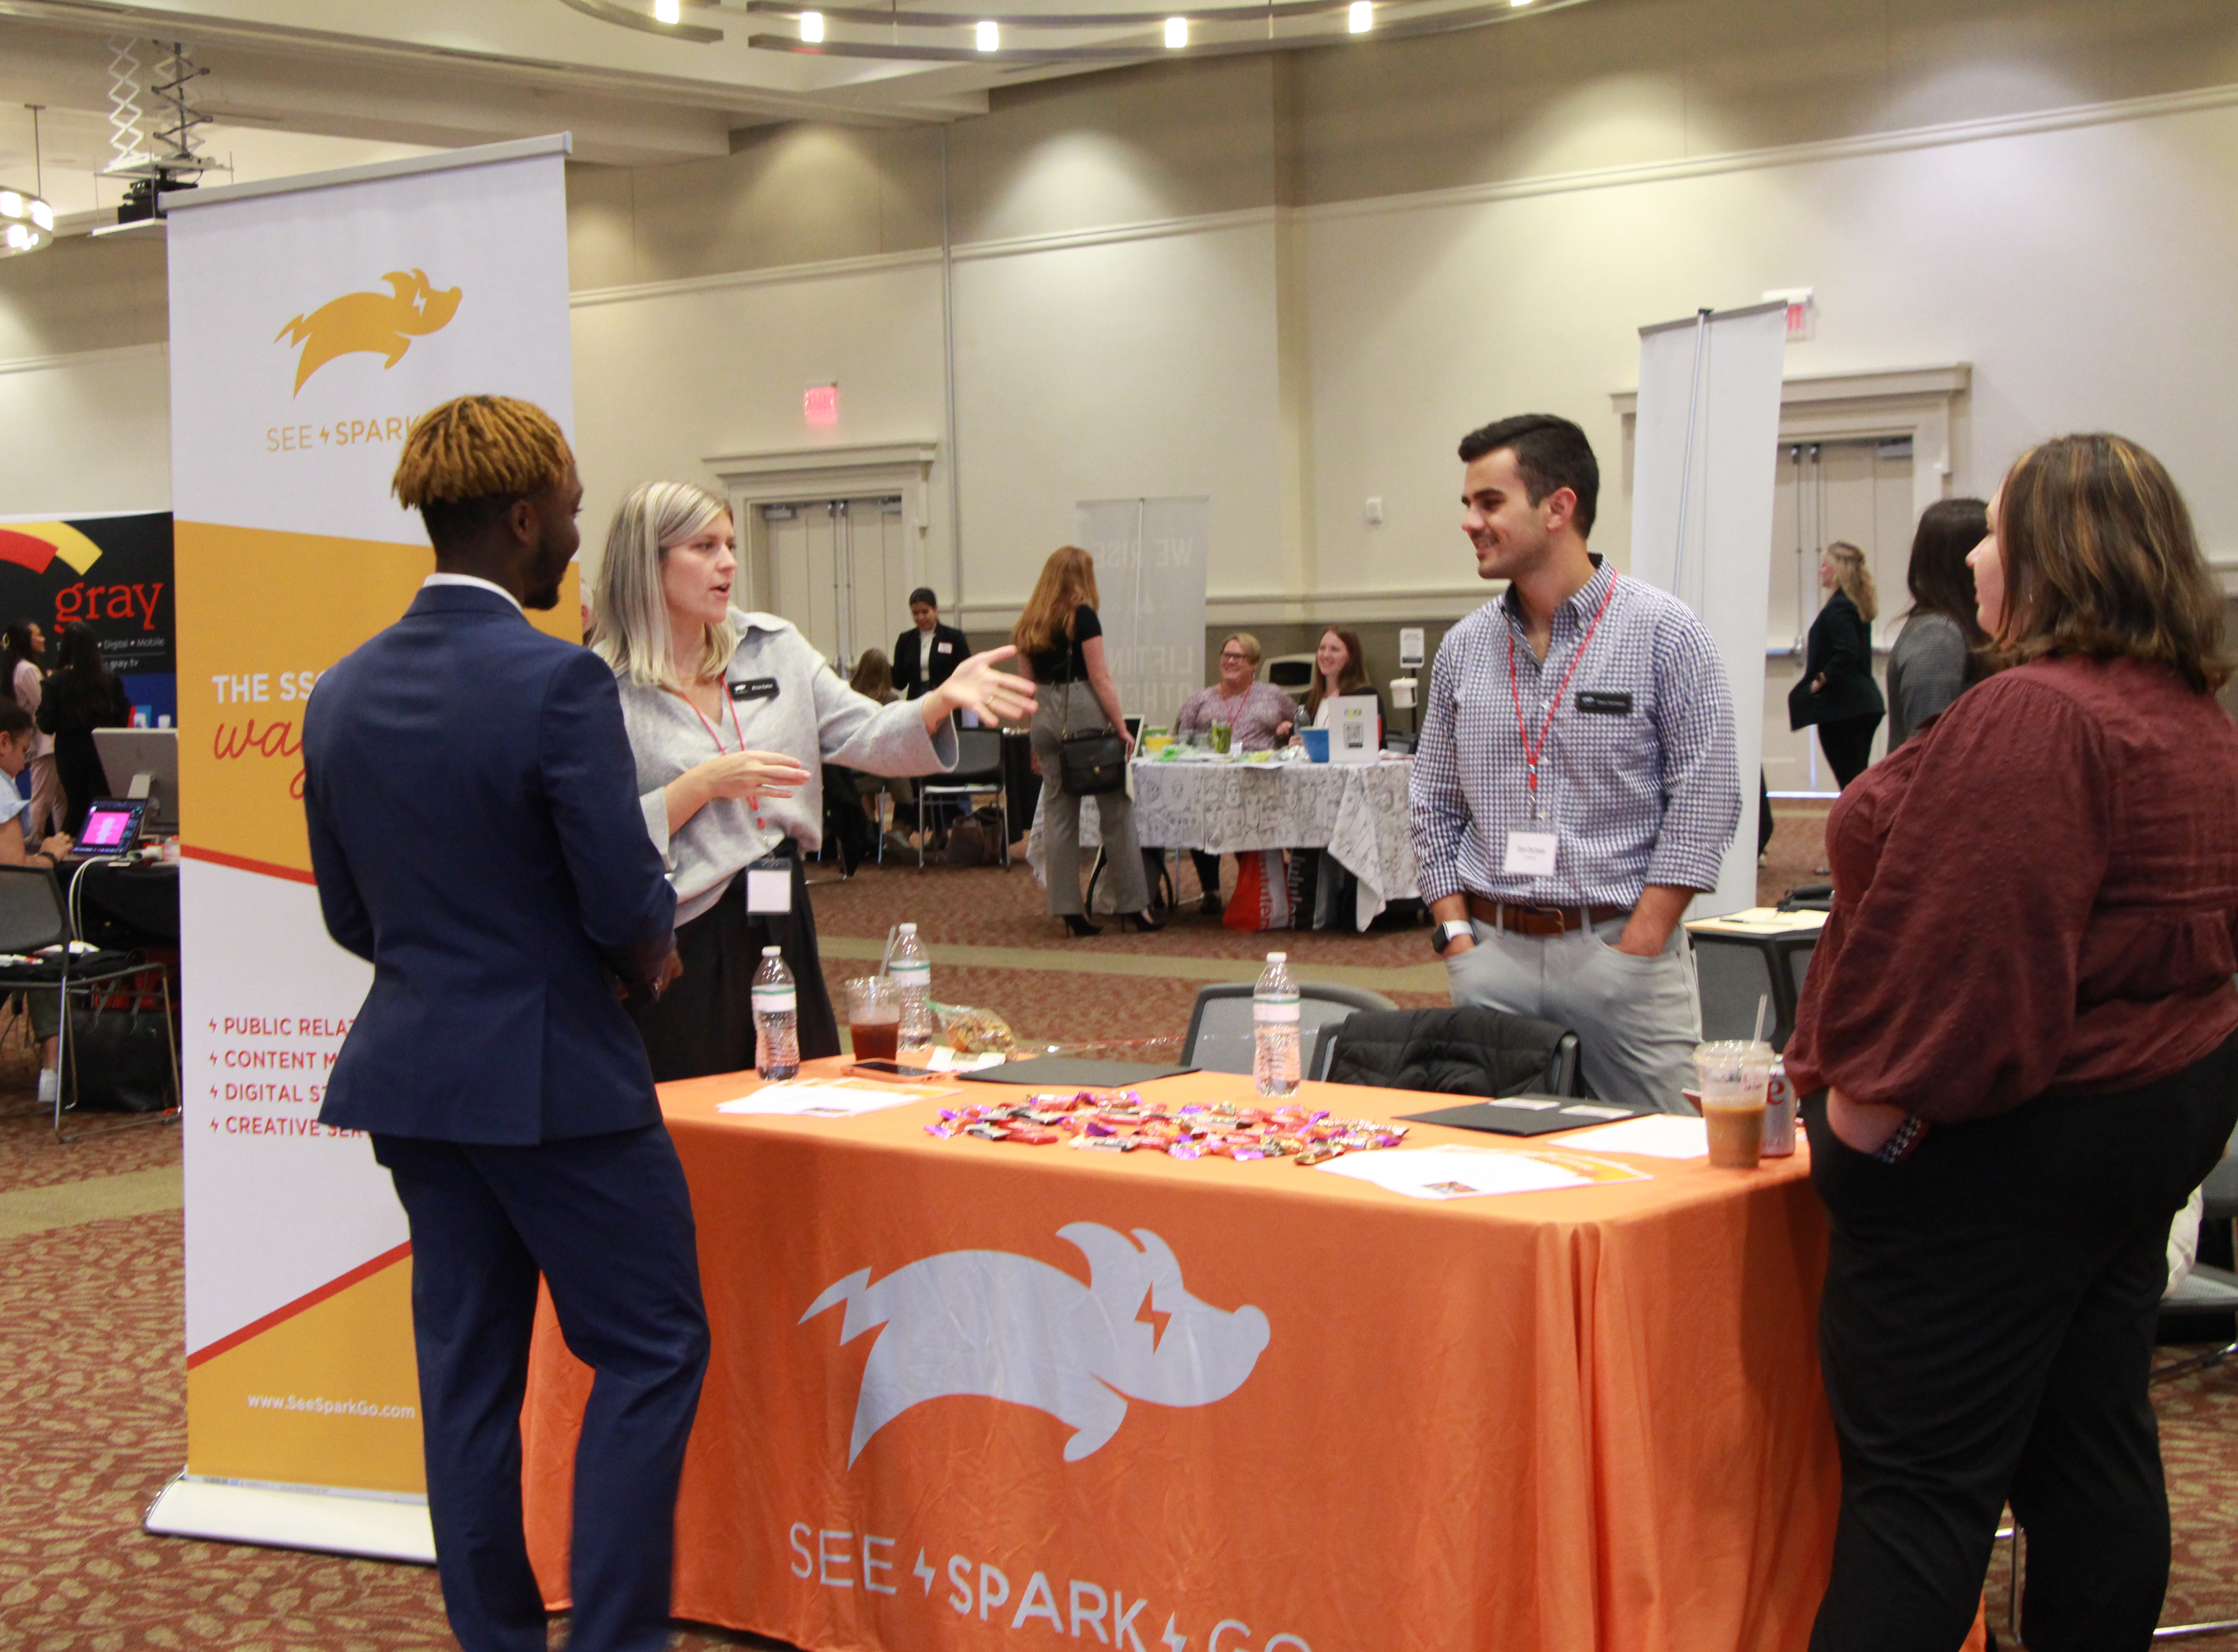 Student network with prospective employers at an orange See Spark Go table.